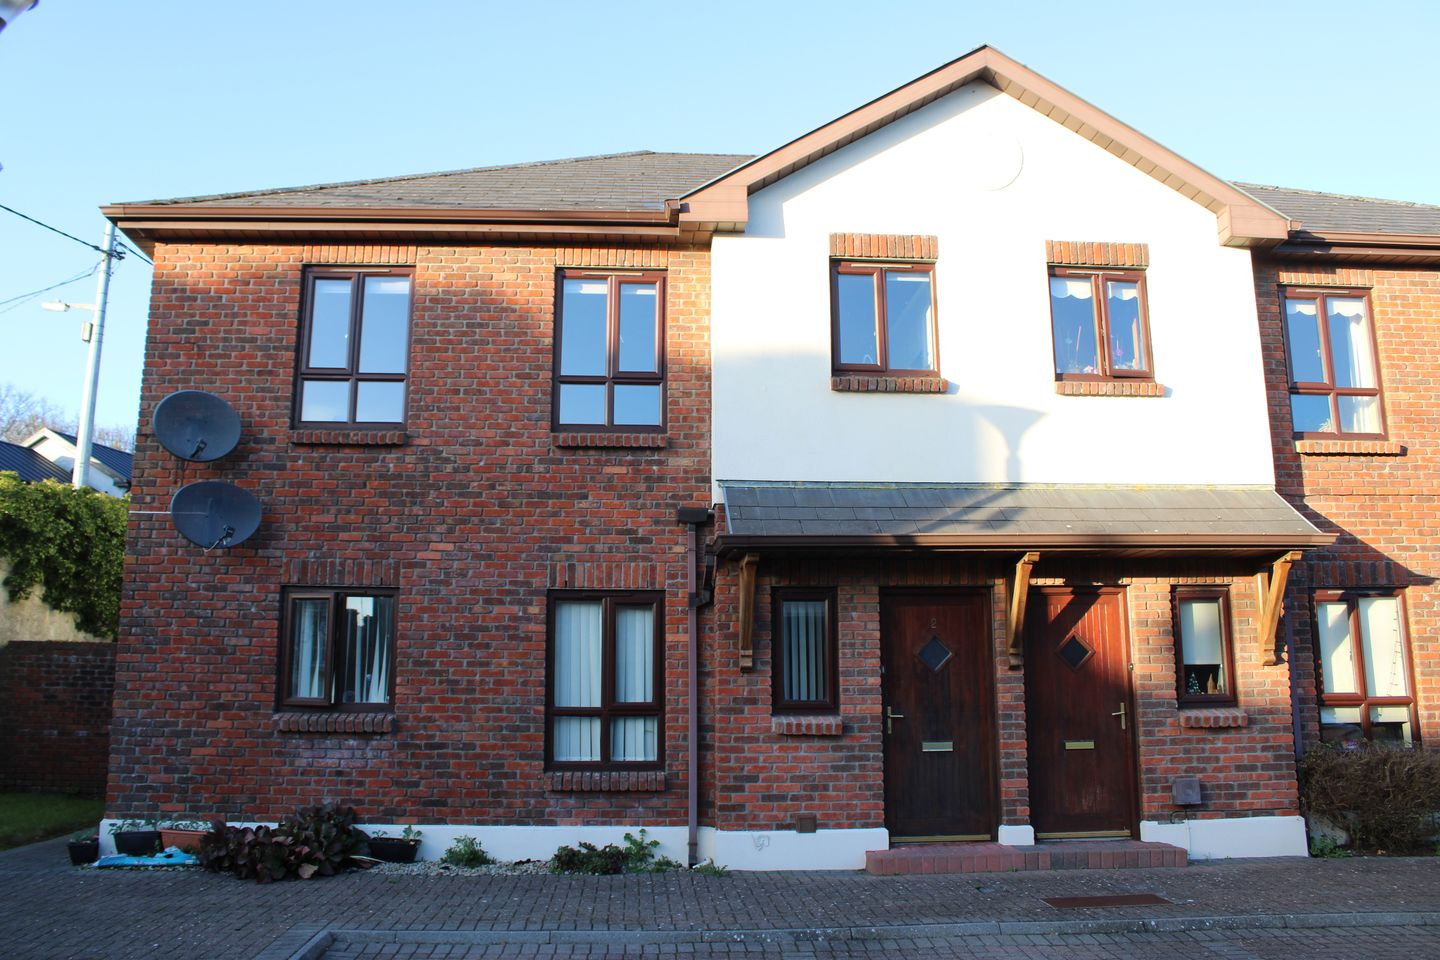 Apartment 2, Waterslade Downs, Tuam, Co. Galway, H54Y283